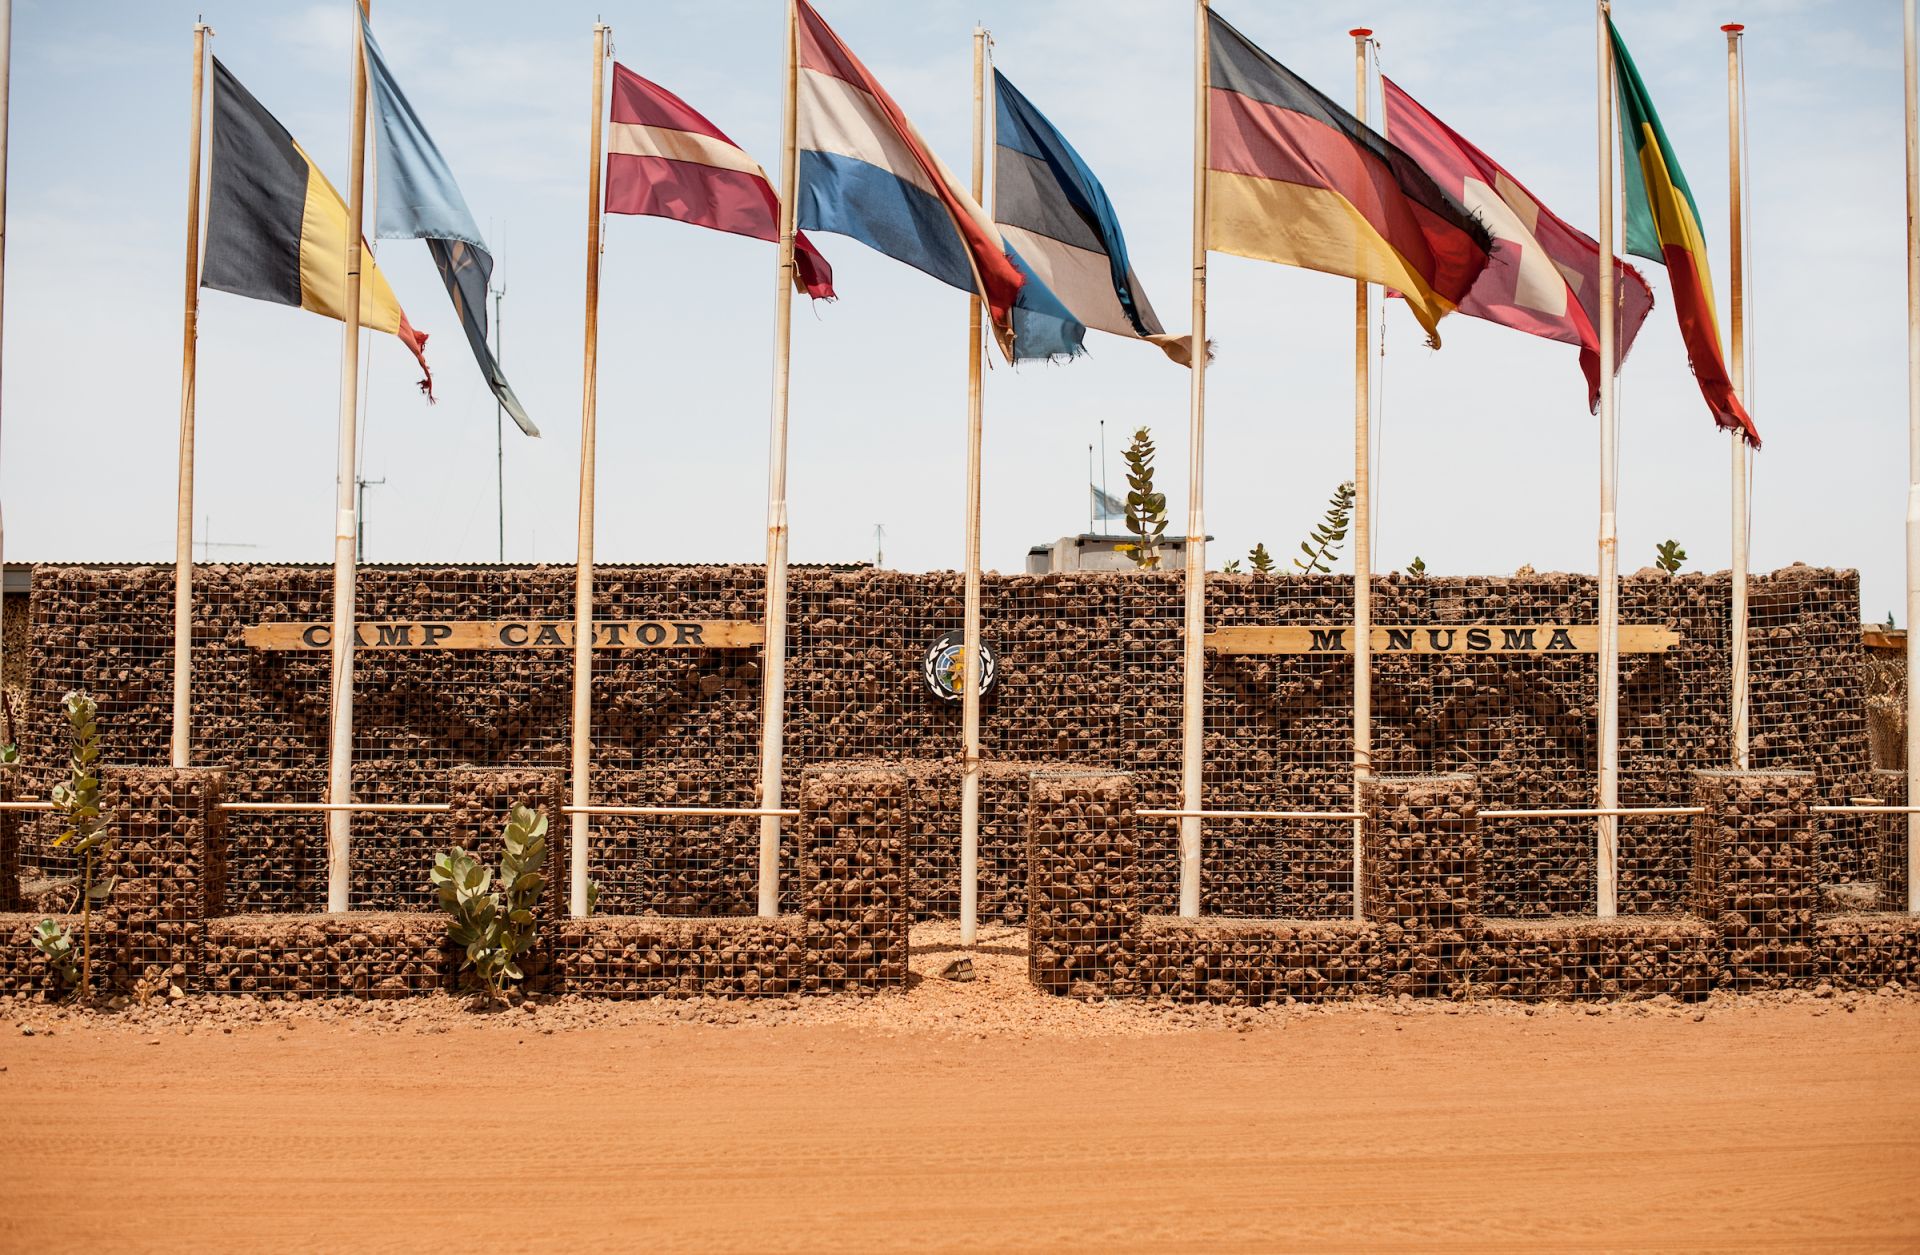 "Camp Castor" in Gao, Mali, is part of the U.N. mission in the country.